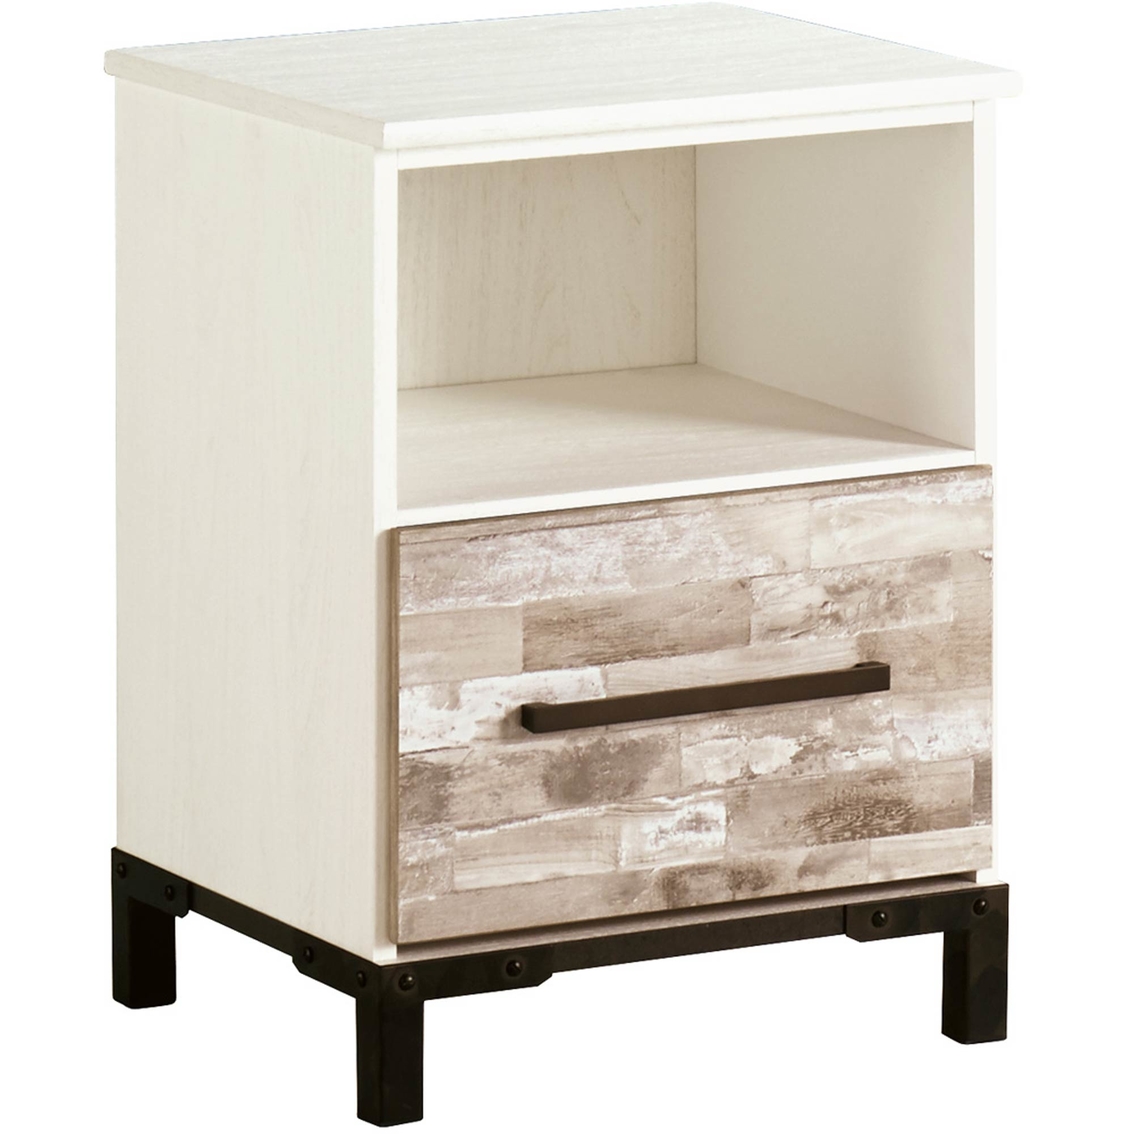 Signature Design by Ashley Evanni 1 Drawer Nightstand - Image 2 of 4